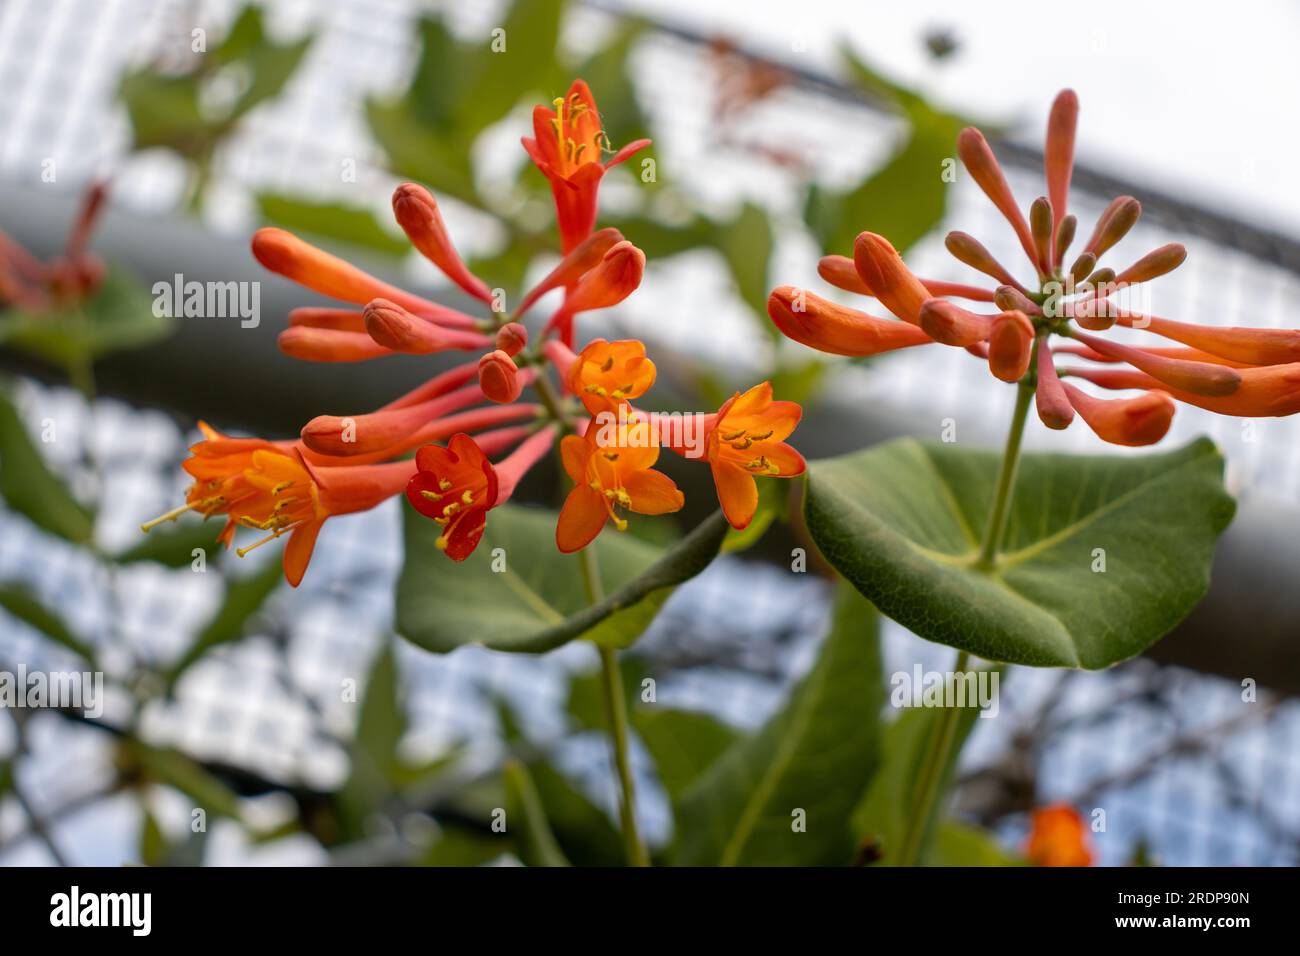 Red tubular flowers with yellow centers hanging from green leafy branch - blurred chain link fence leaf background Stock Photo